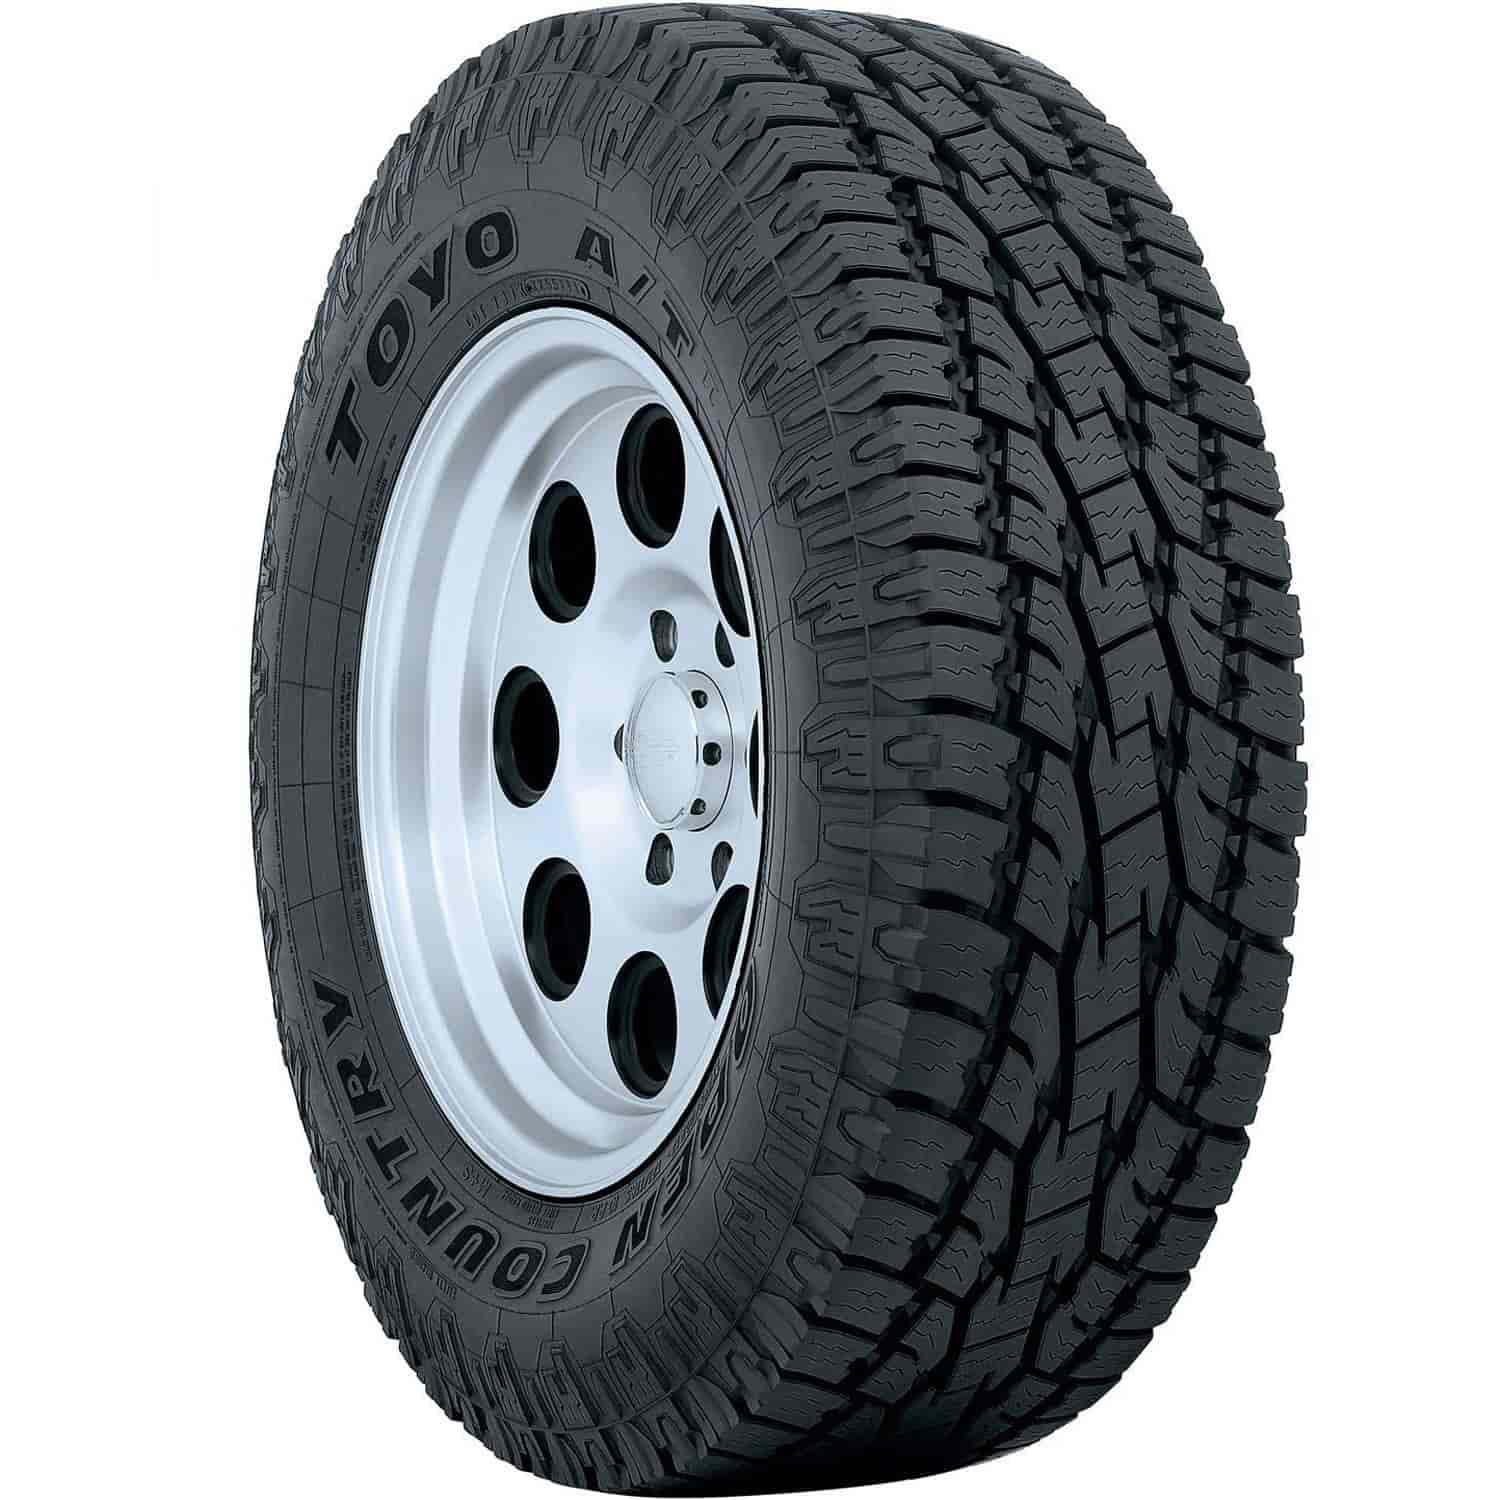 OPEN COUNTRY A/T II LT285/60R20 125/122R